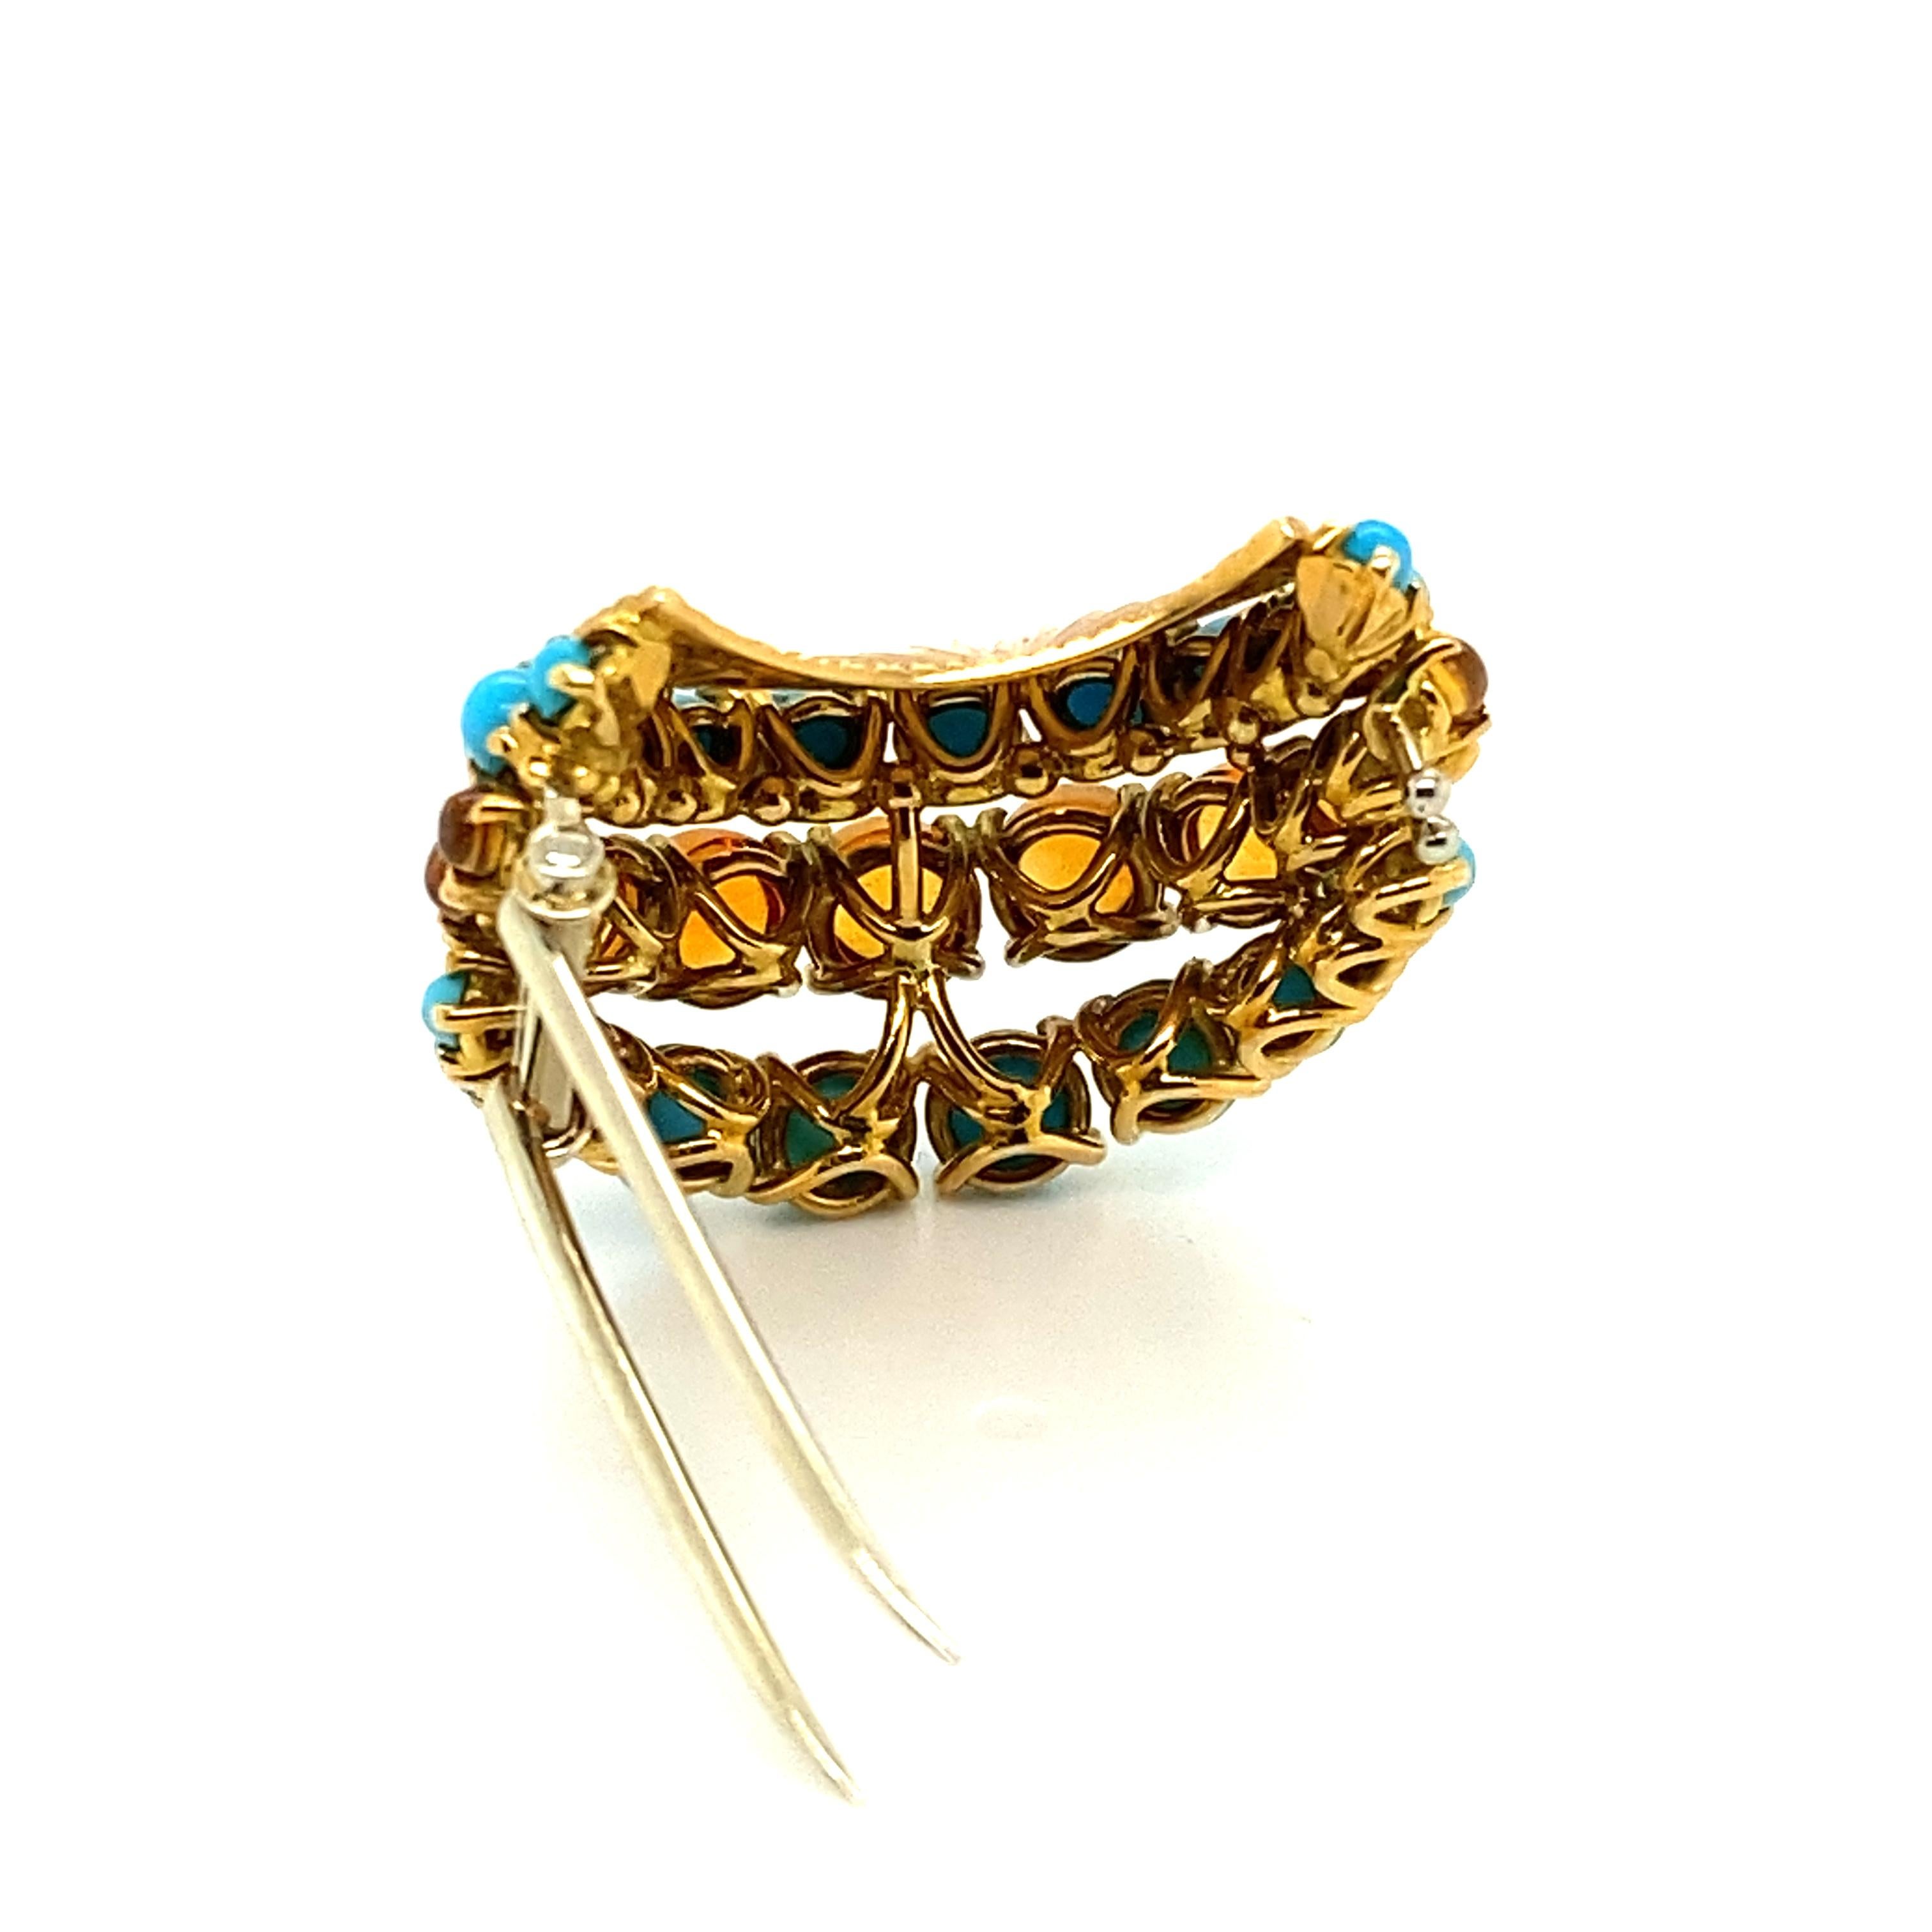 Gübelin Retro Brooch in 18 Karat Yellow Gold with Turquoises and Citrines For Sale 5